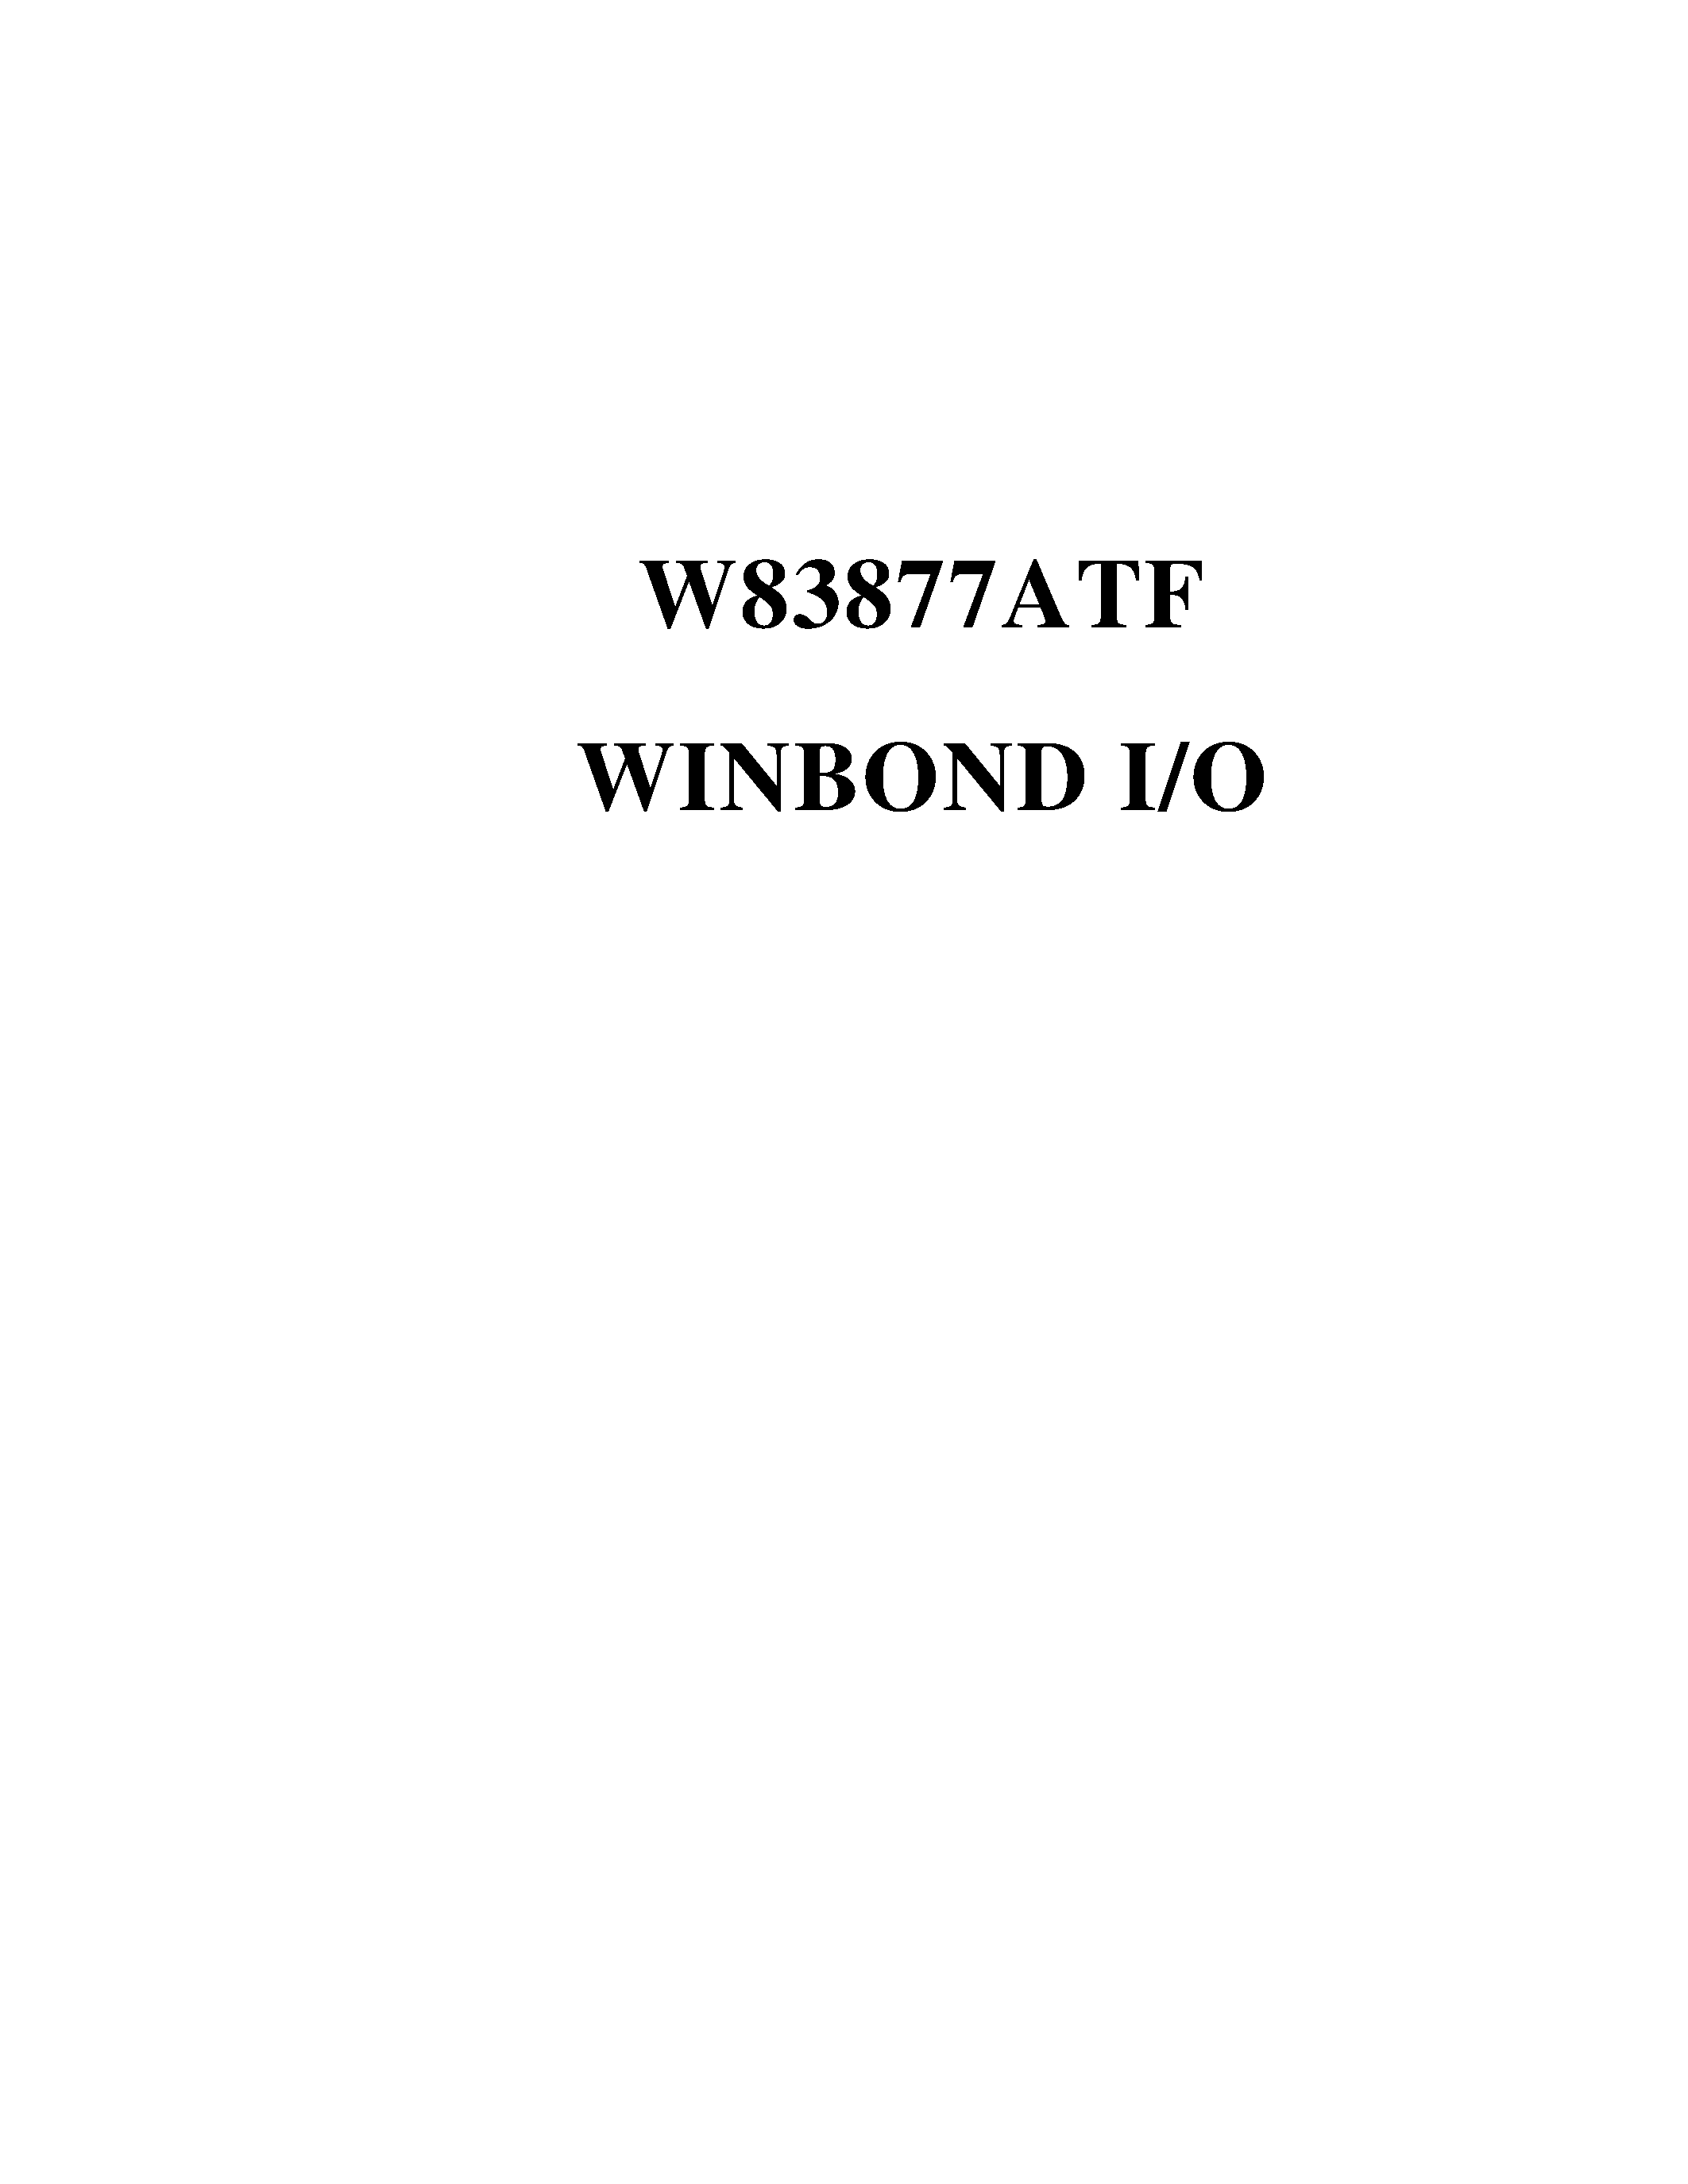 Datasheet W83877ATD - enhanced version from Winbonds most popular I/O chip W83877F page 1